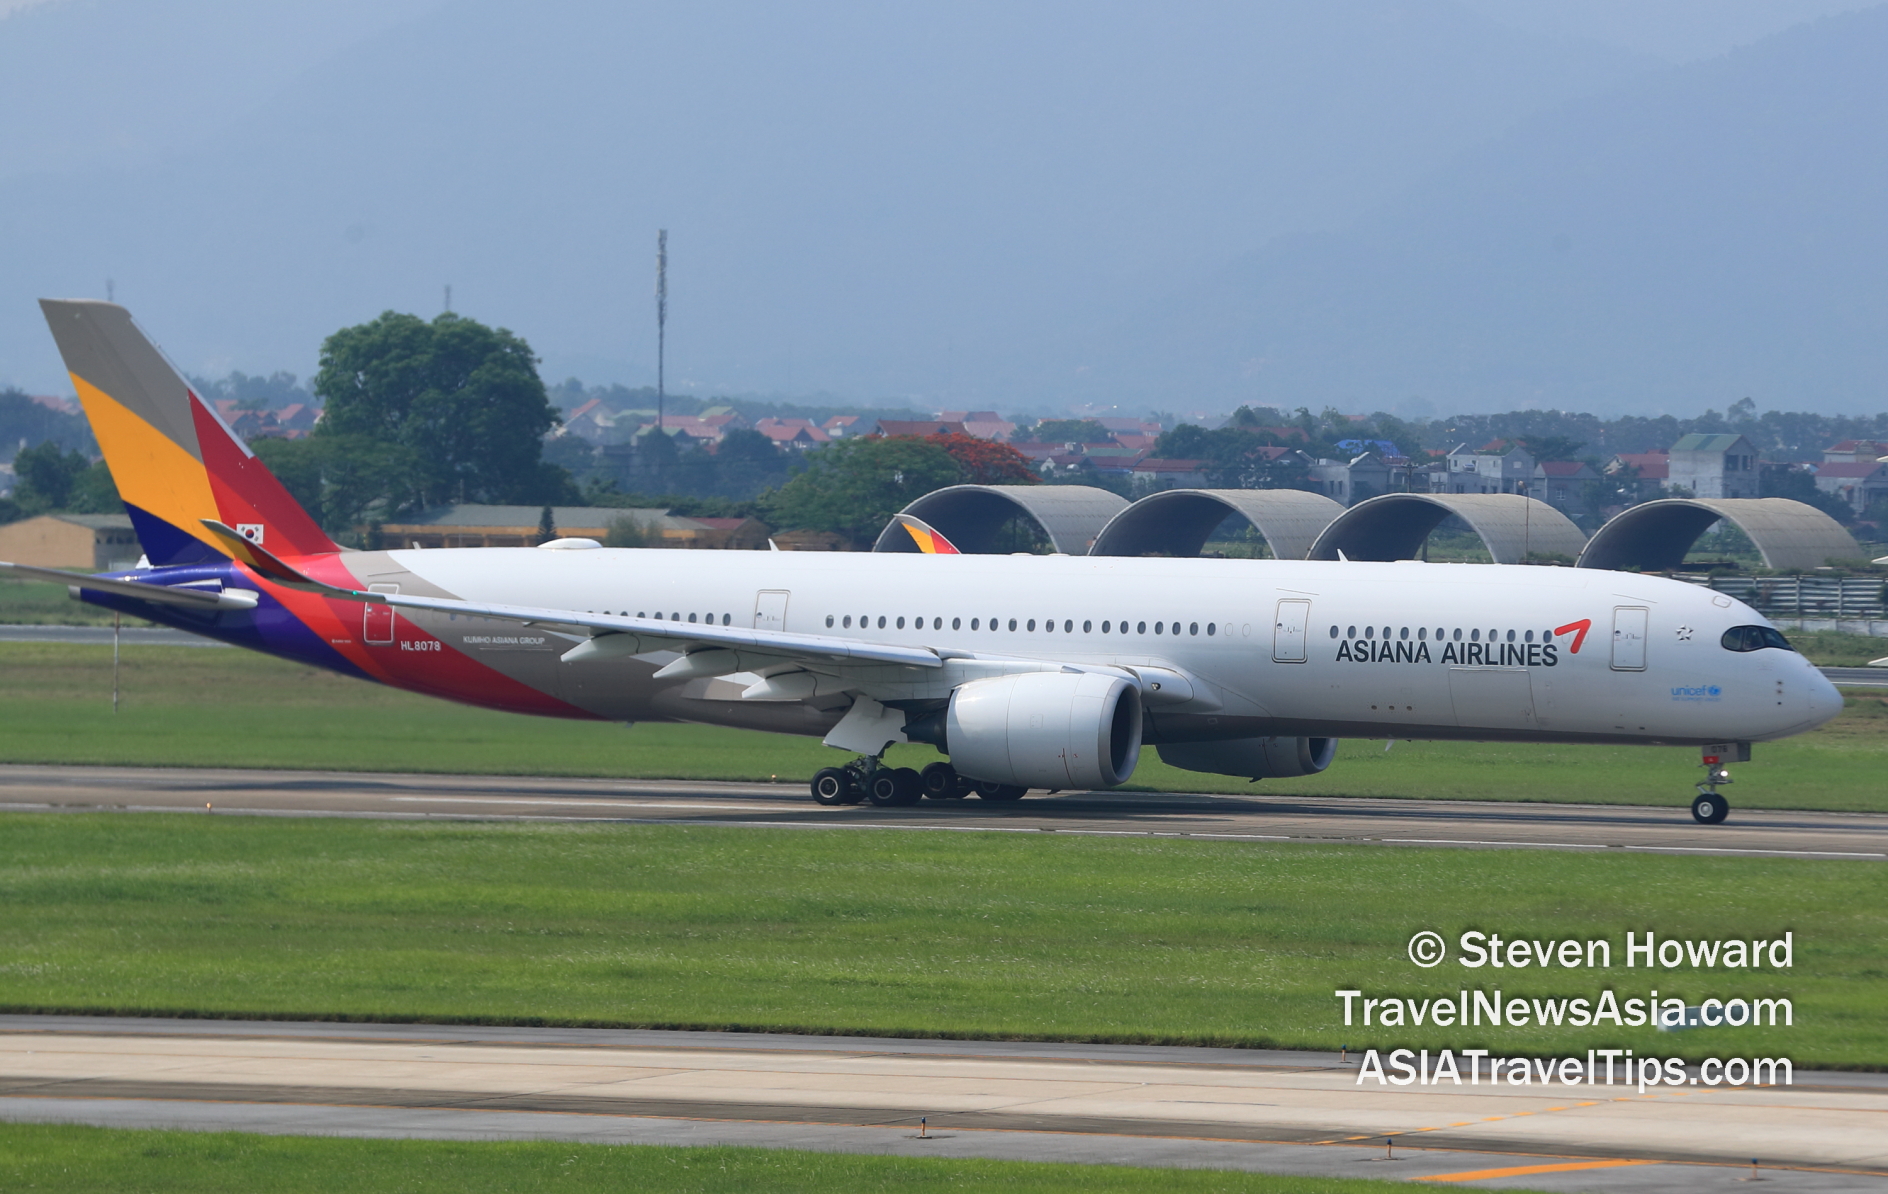 Asiana Airlines A350 reg: HL8078. Picture by Steven Howard of TravelNewsAsia.com Click to enlarge.